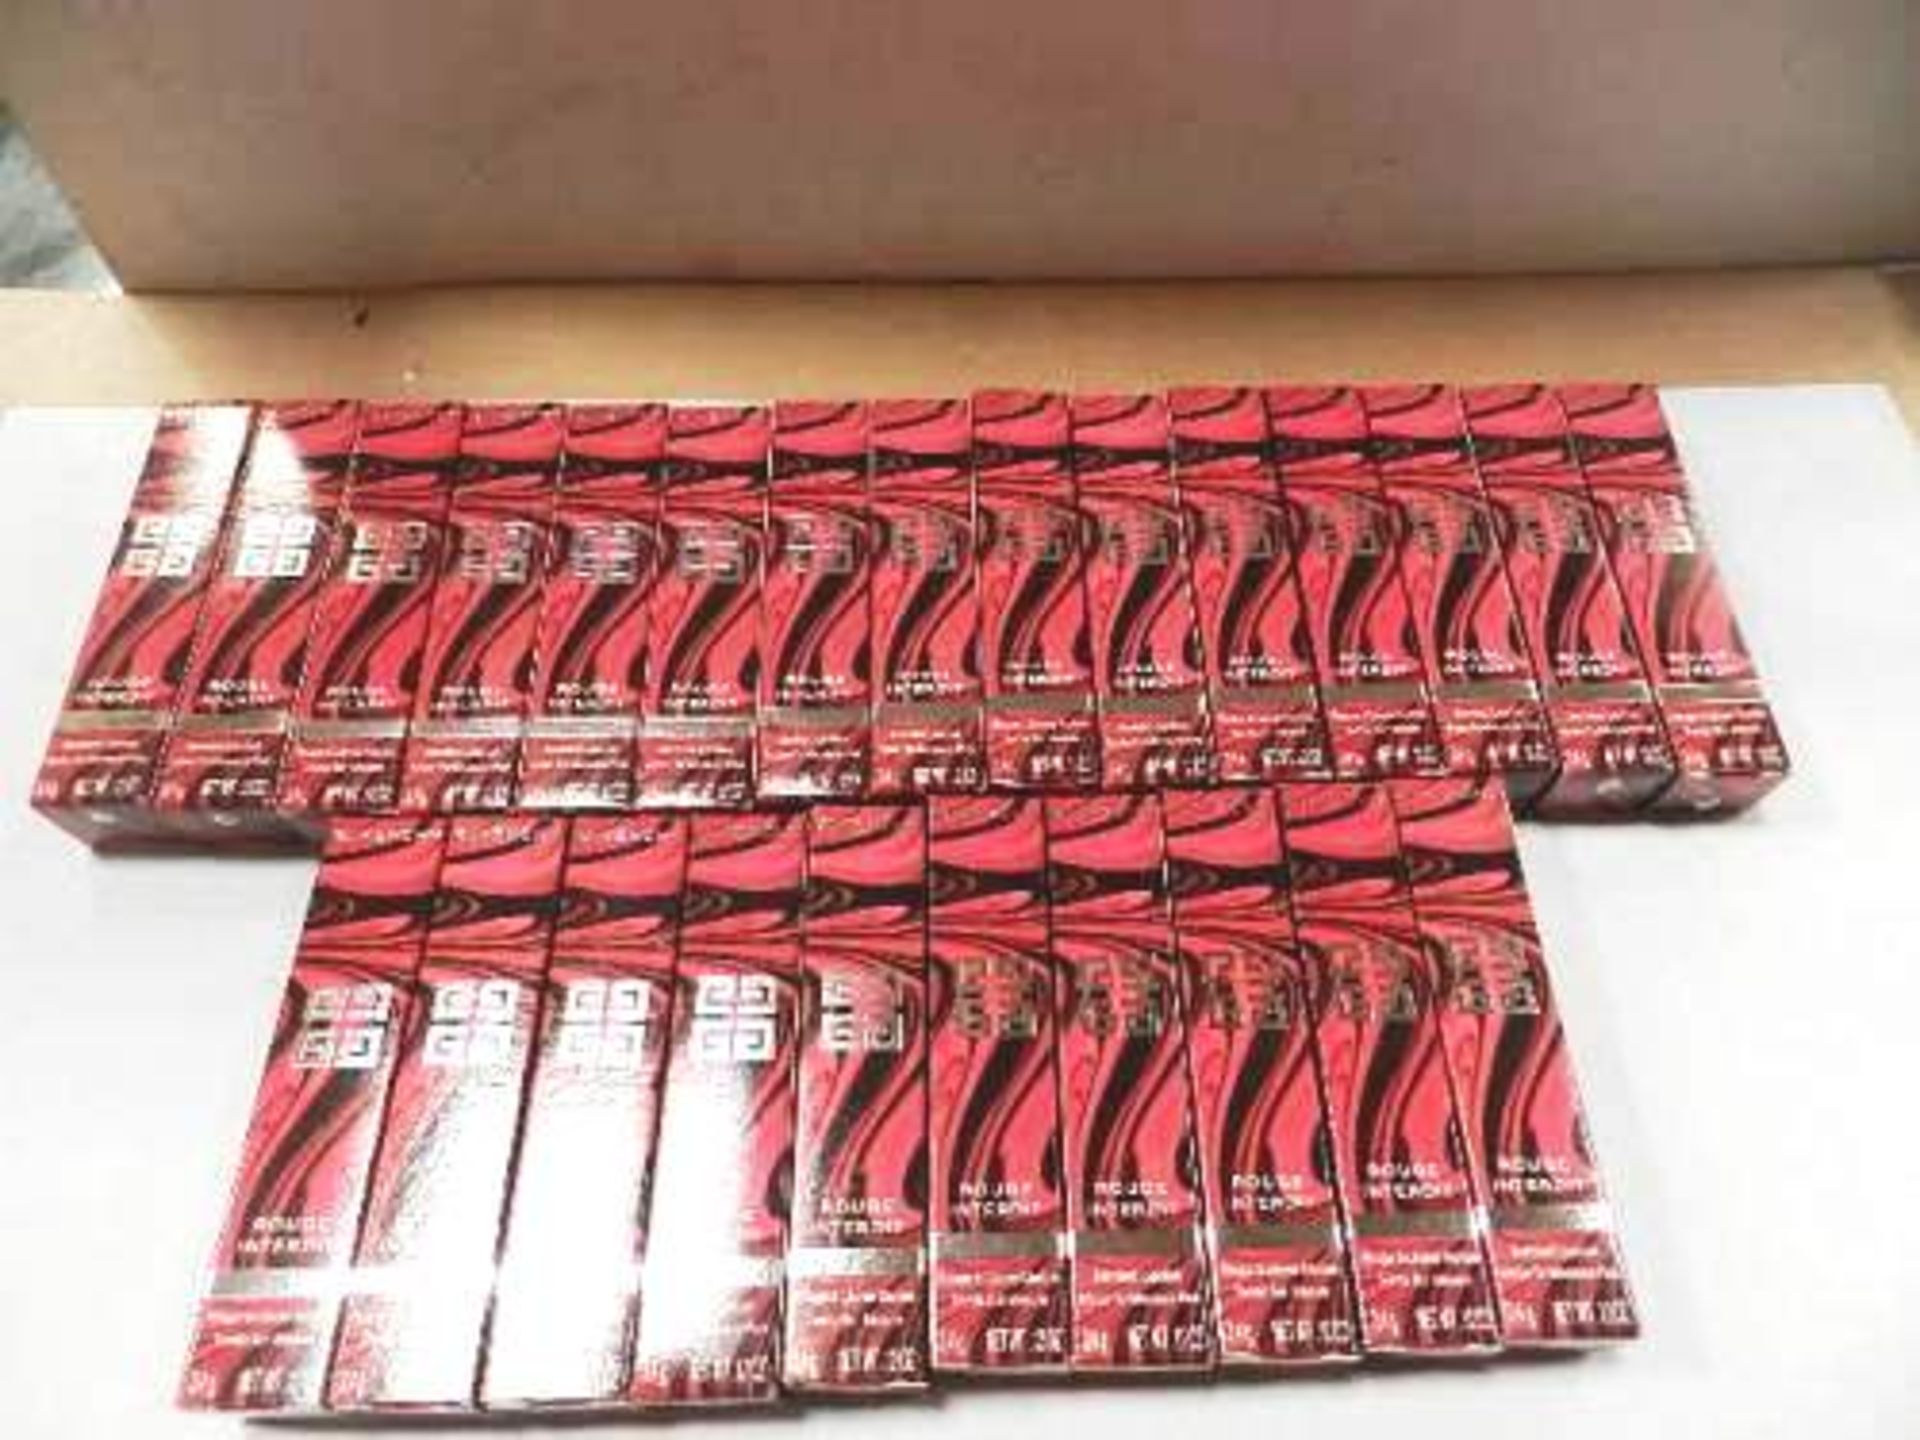 25 x Givenchy Rouge Interdit marbled lipsticks - New (C14A)